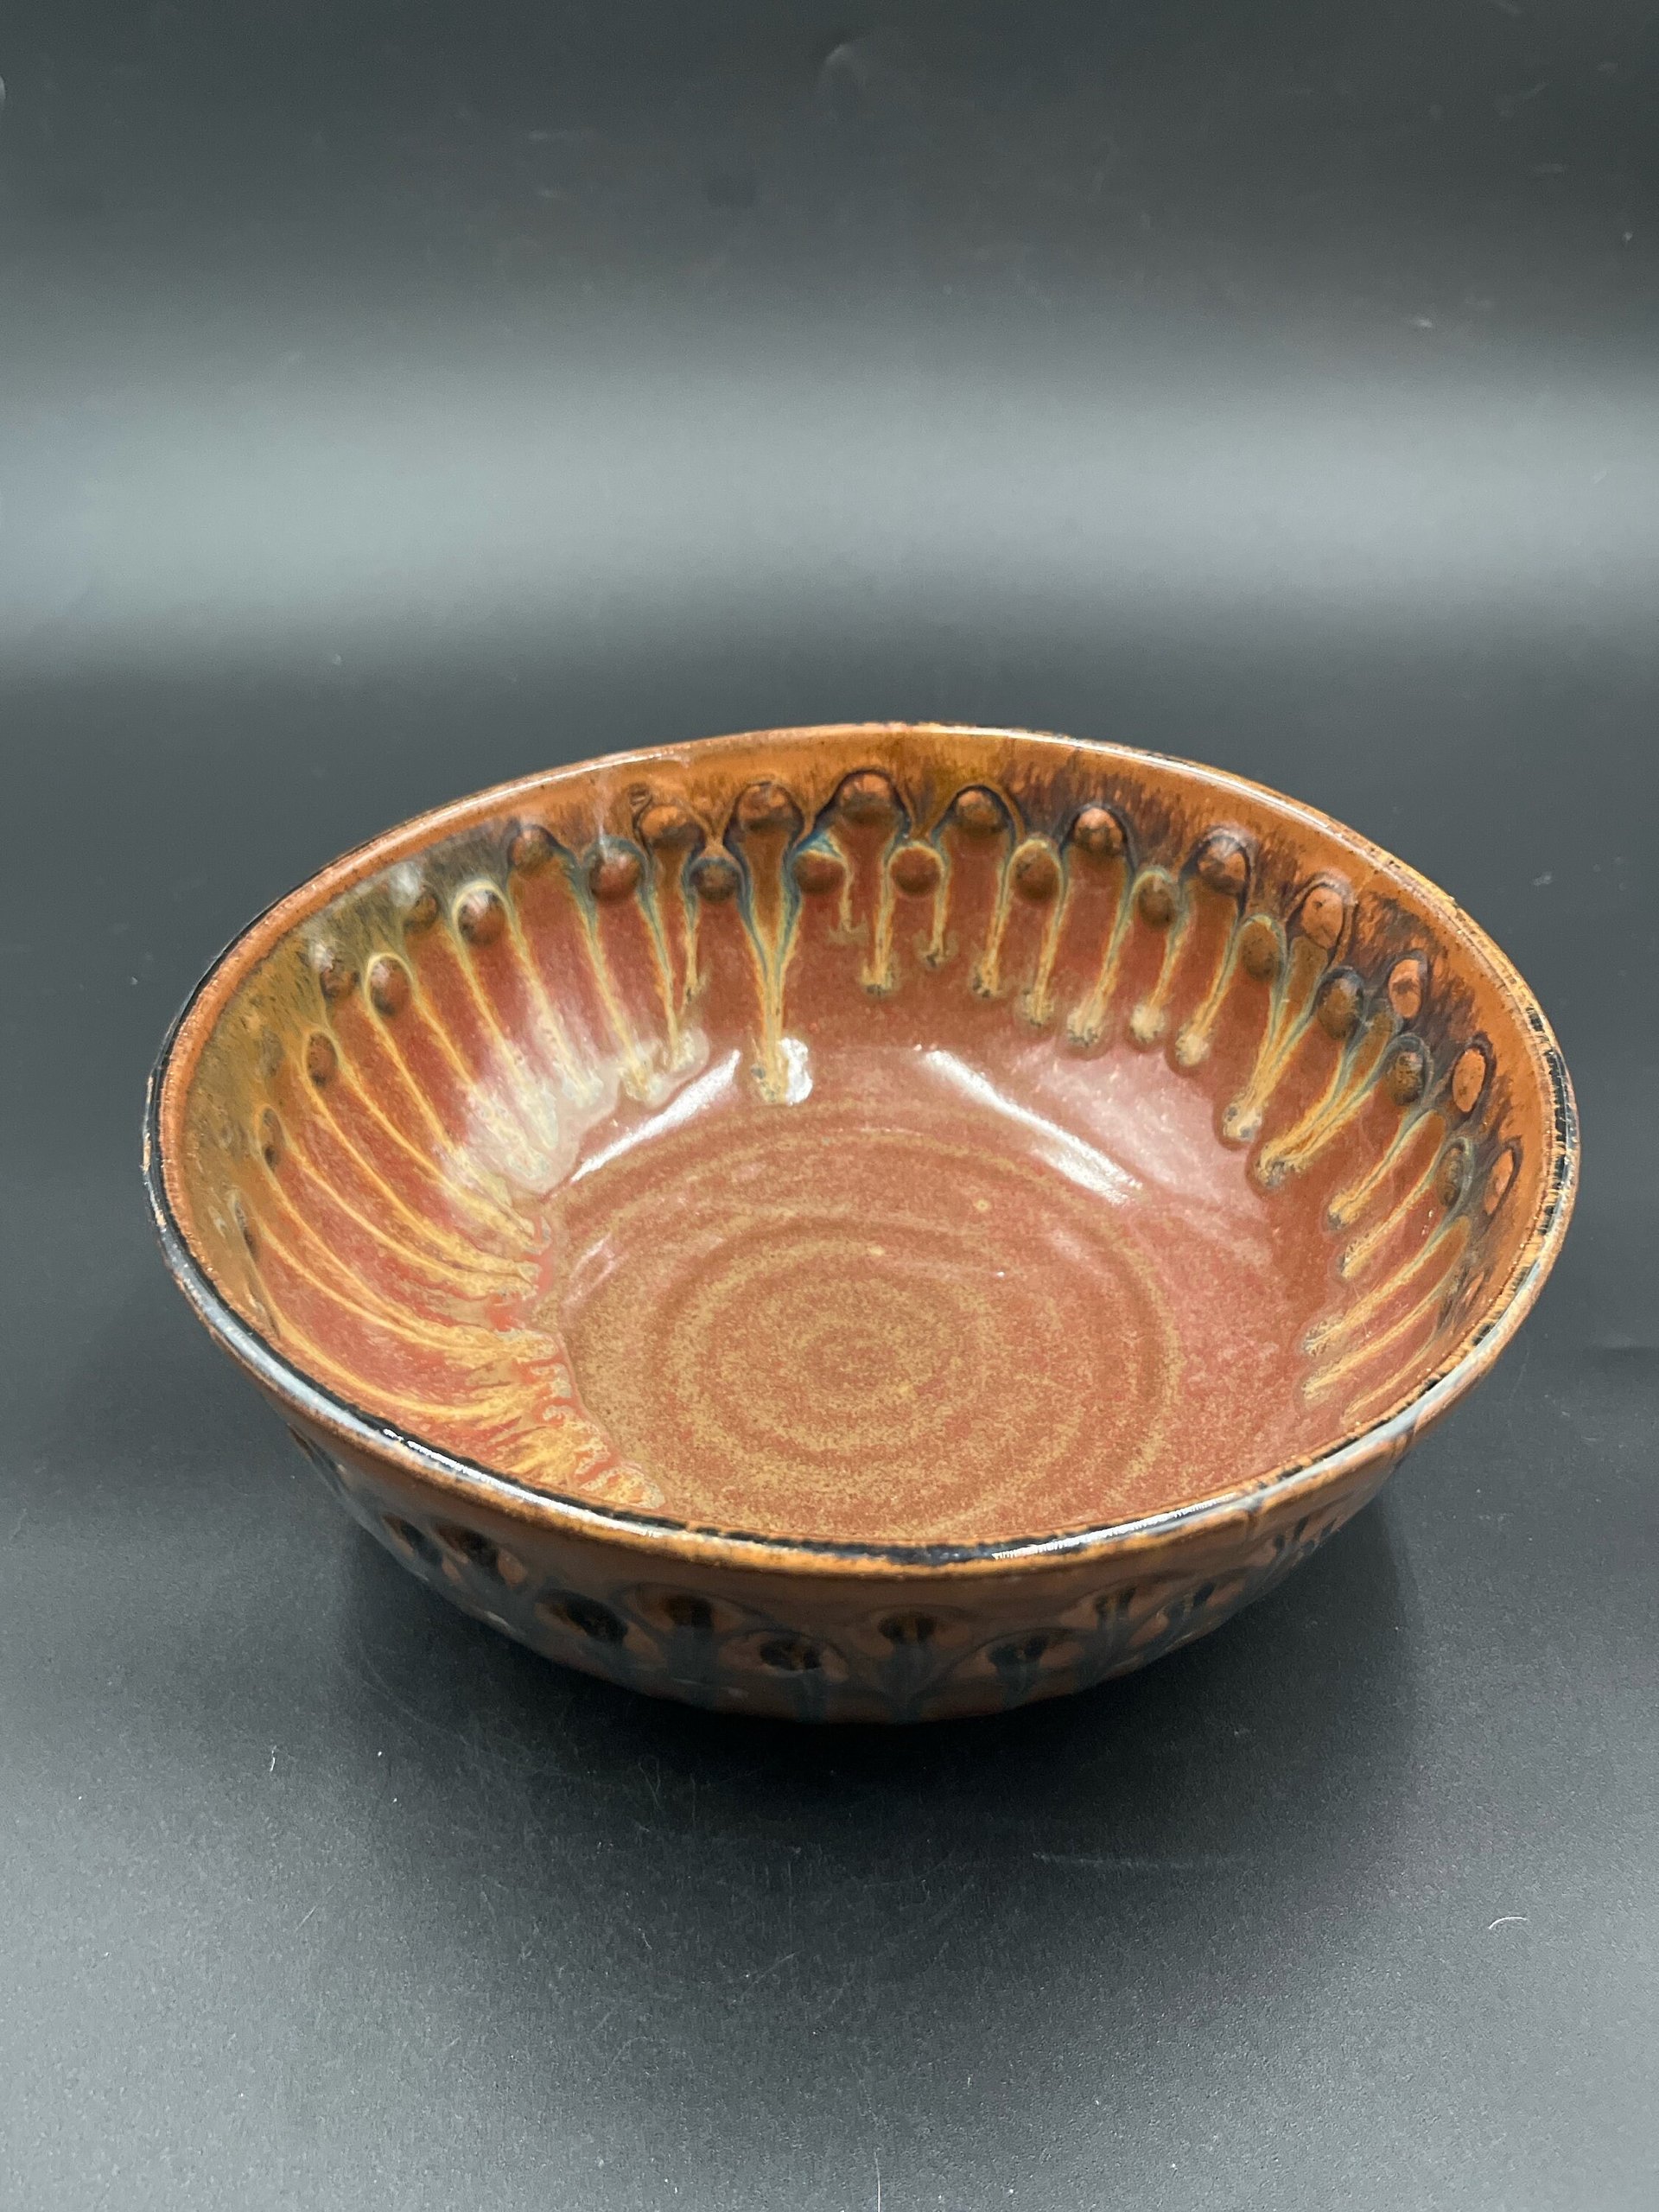 Hand-made Polka-dot Earthy Red and Honey Serving Bowl